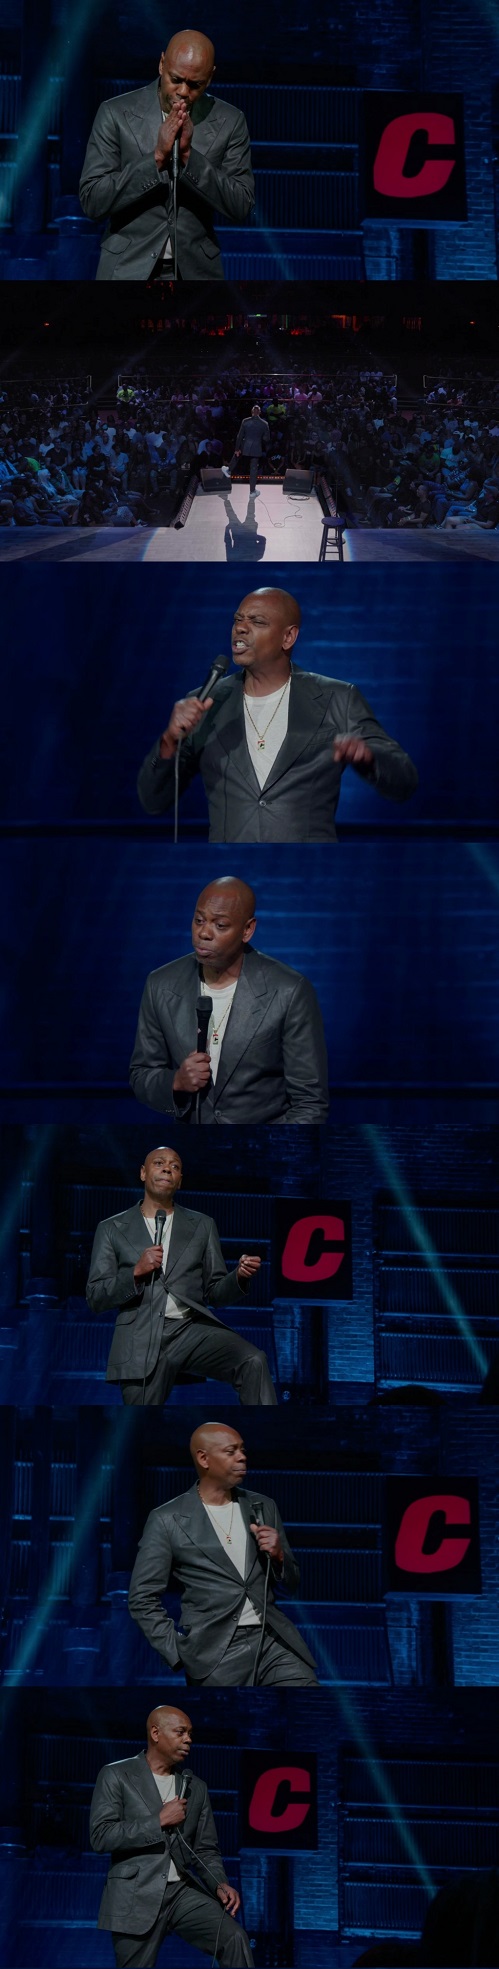 Dave Chappelle The Closer 2021 English 720p Web-DL ESubs